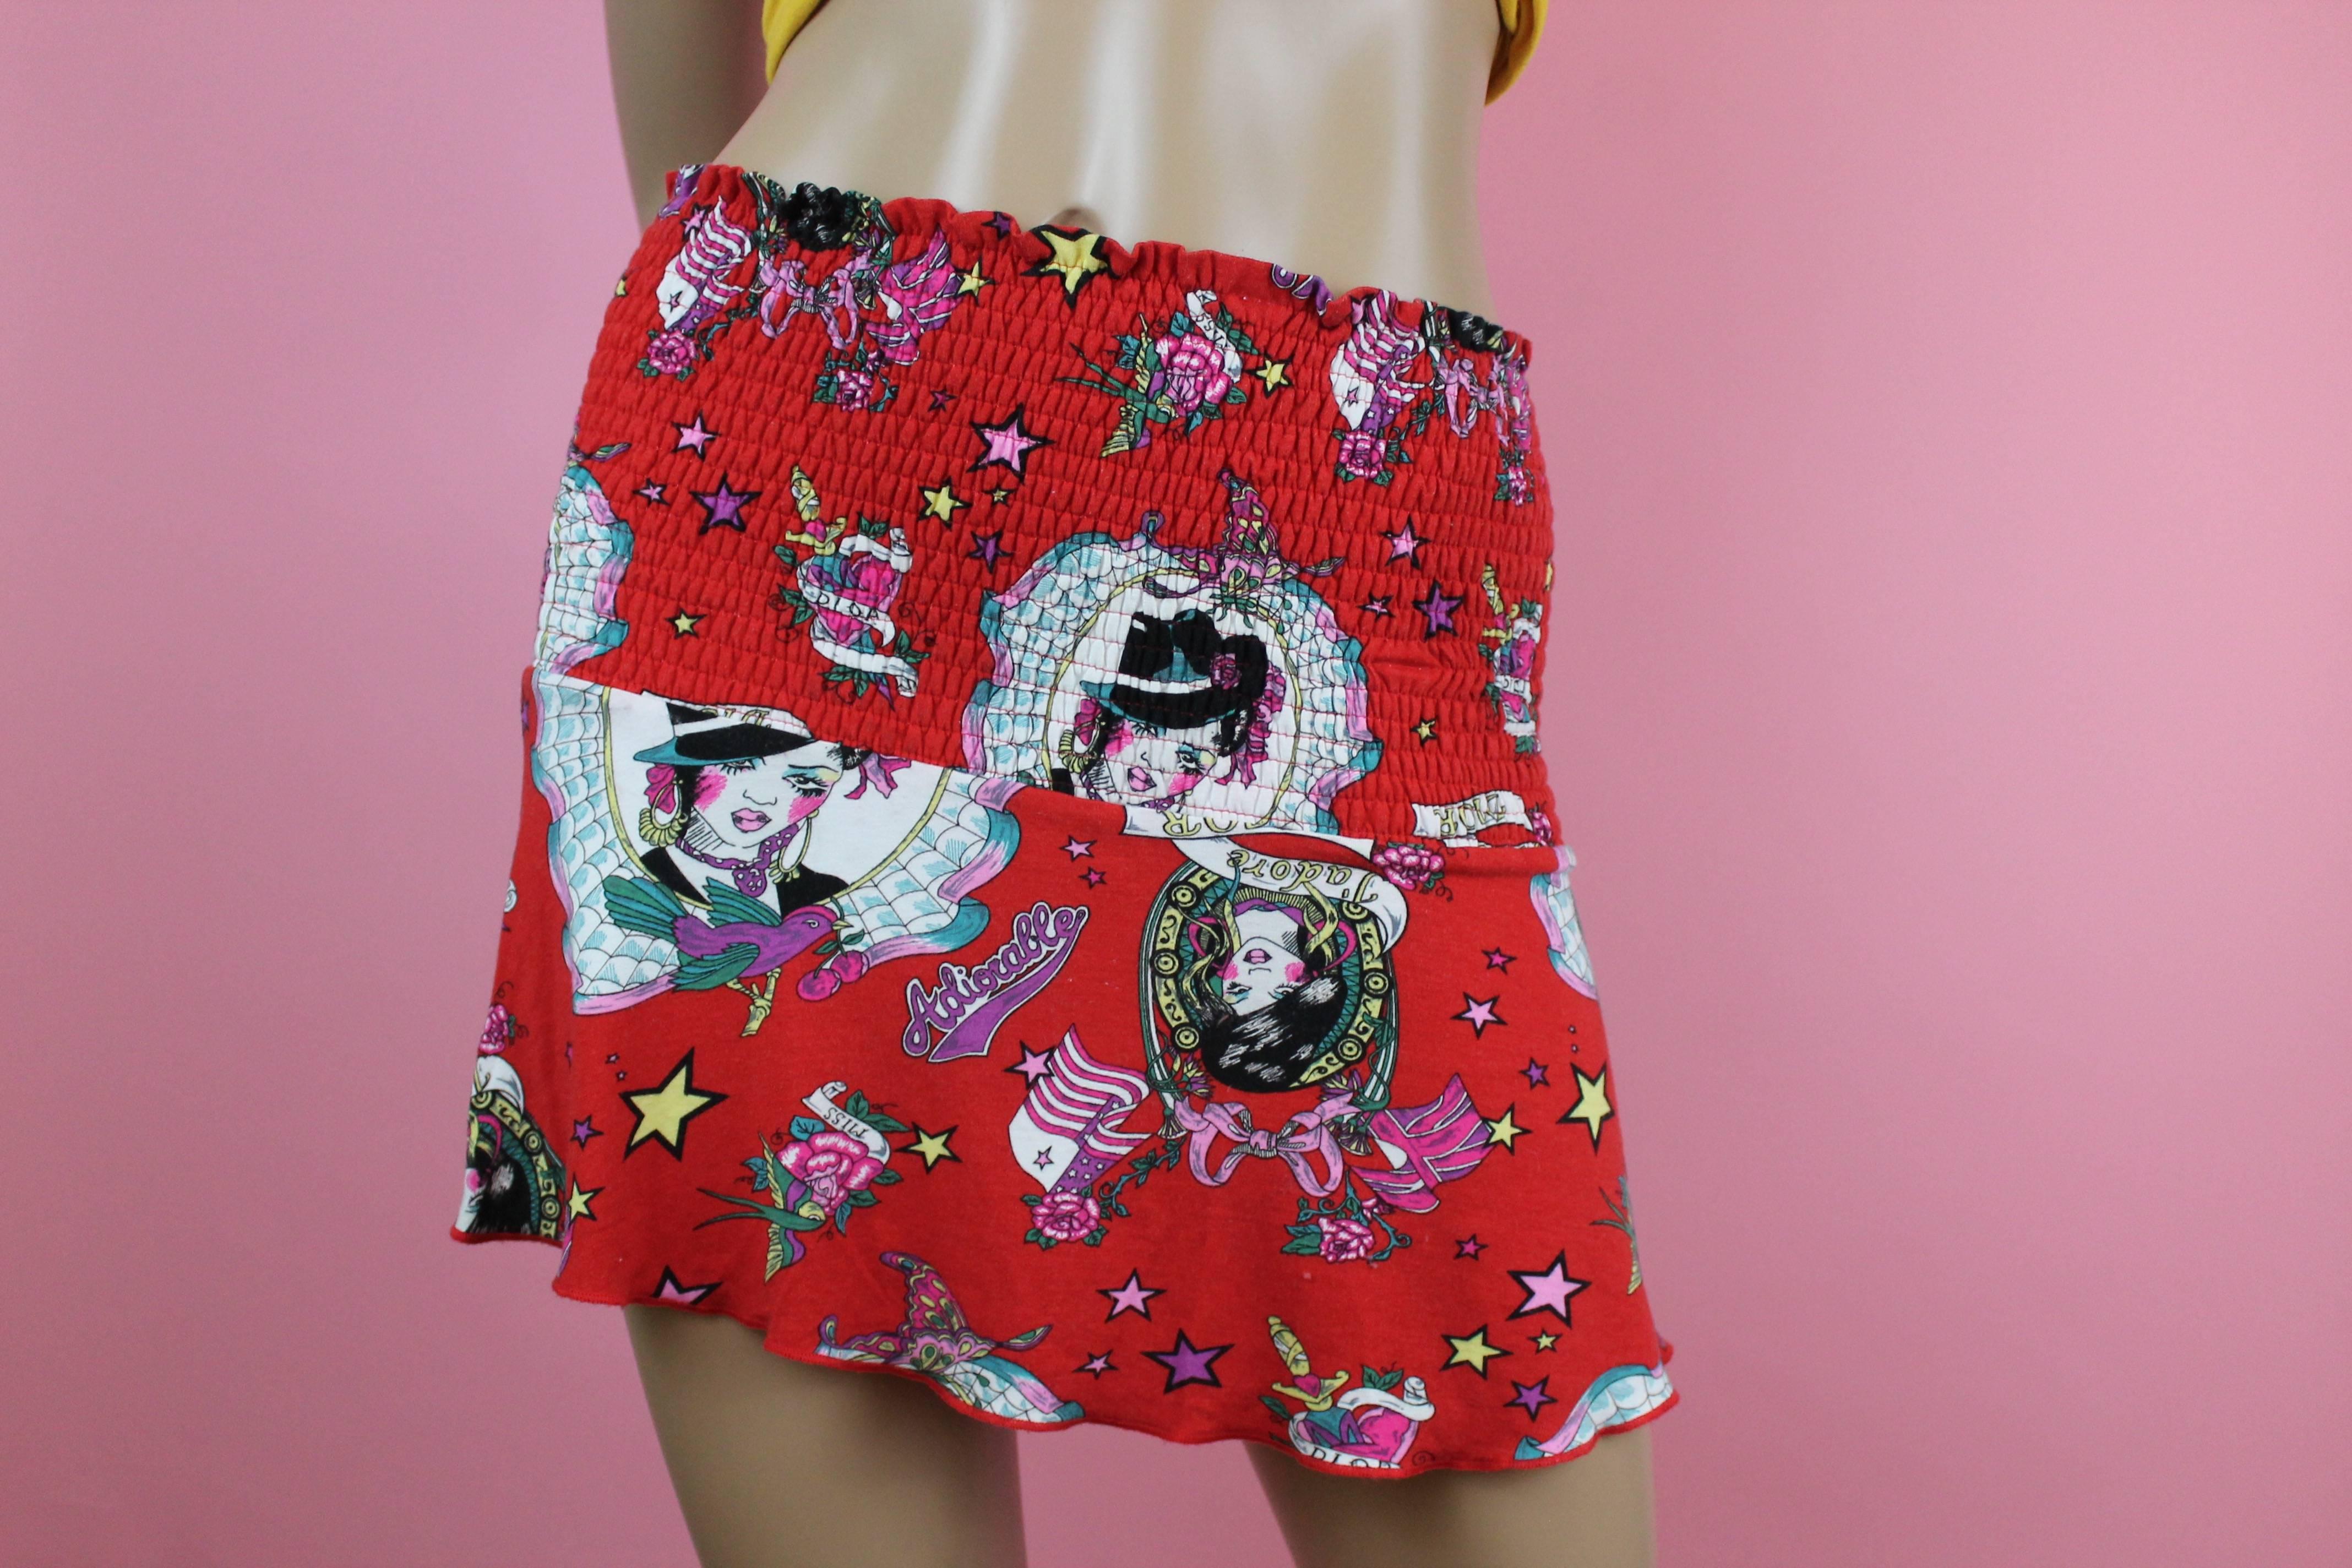 -Super cute miniskirt from Galliano for Dior 